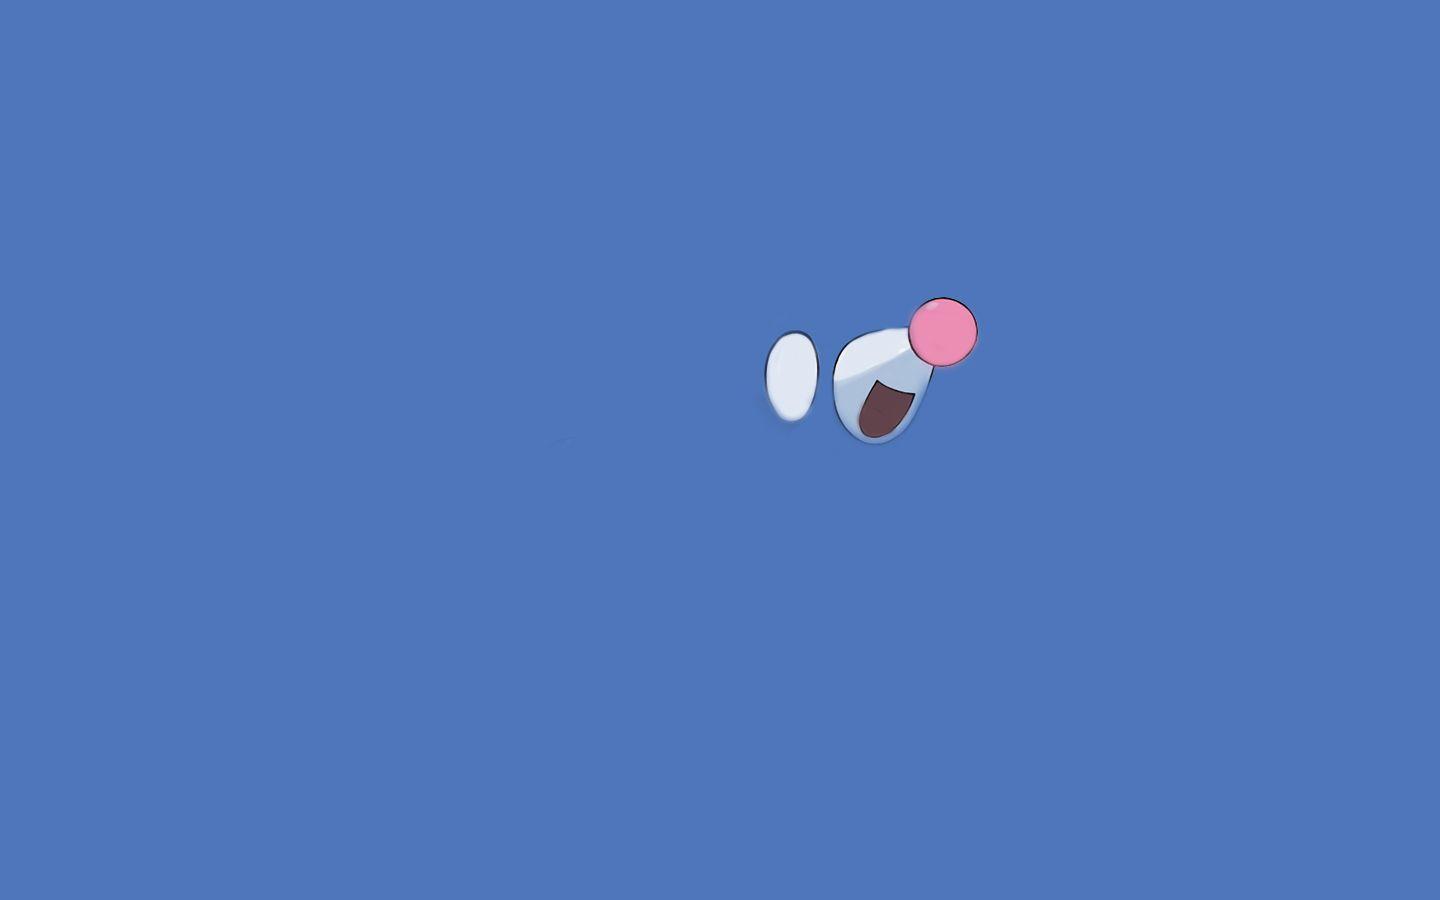 I tried (and failed) to make a minimalist Popplio wallpaper